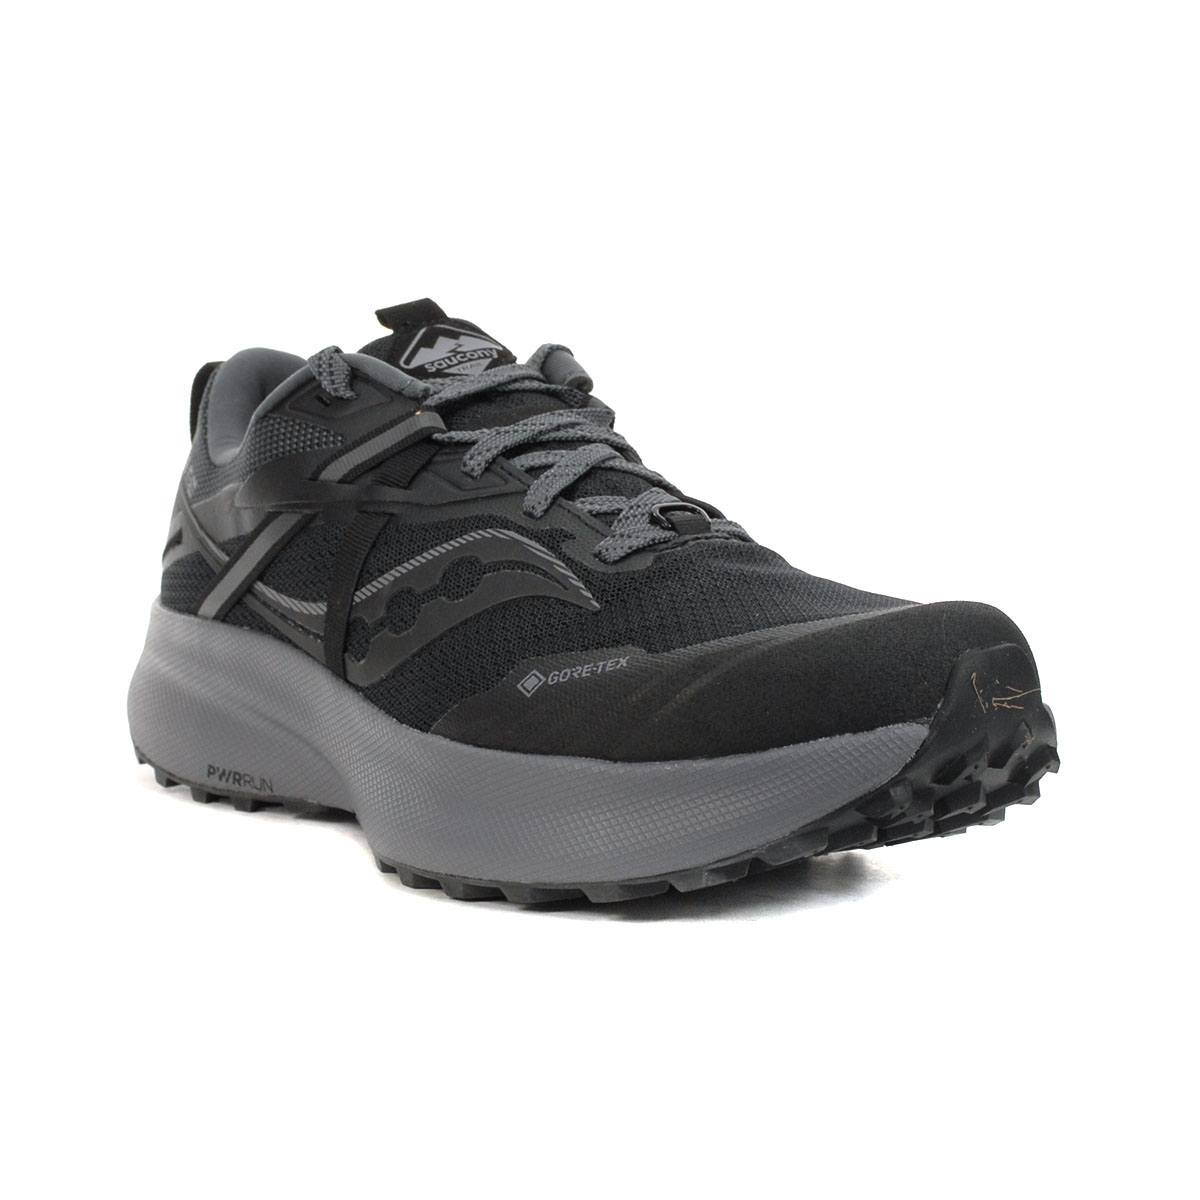 Saucony Men's Ride 15 TR GTX Black/Charcoal Trail Running Shoes S20799 ...